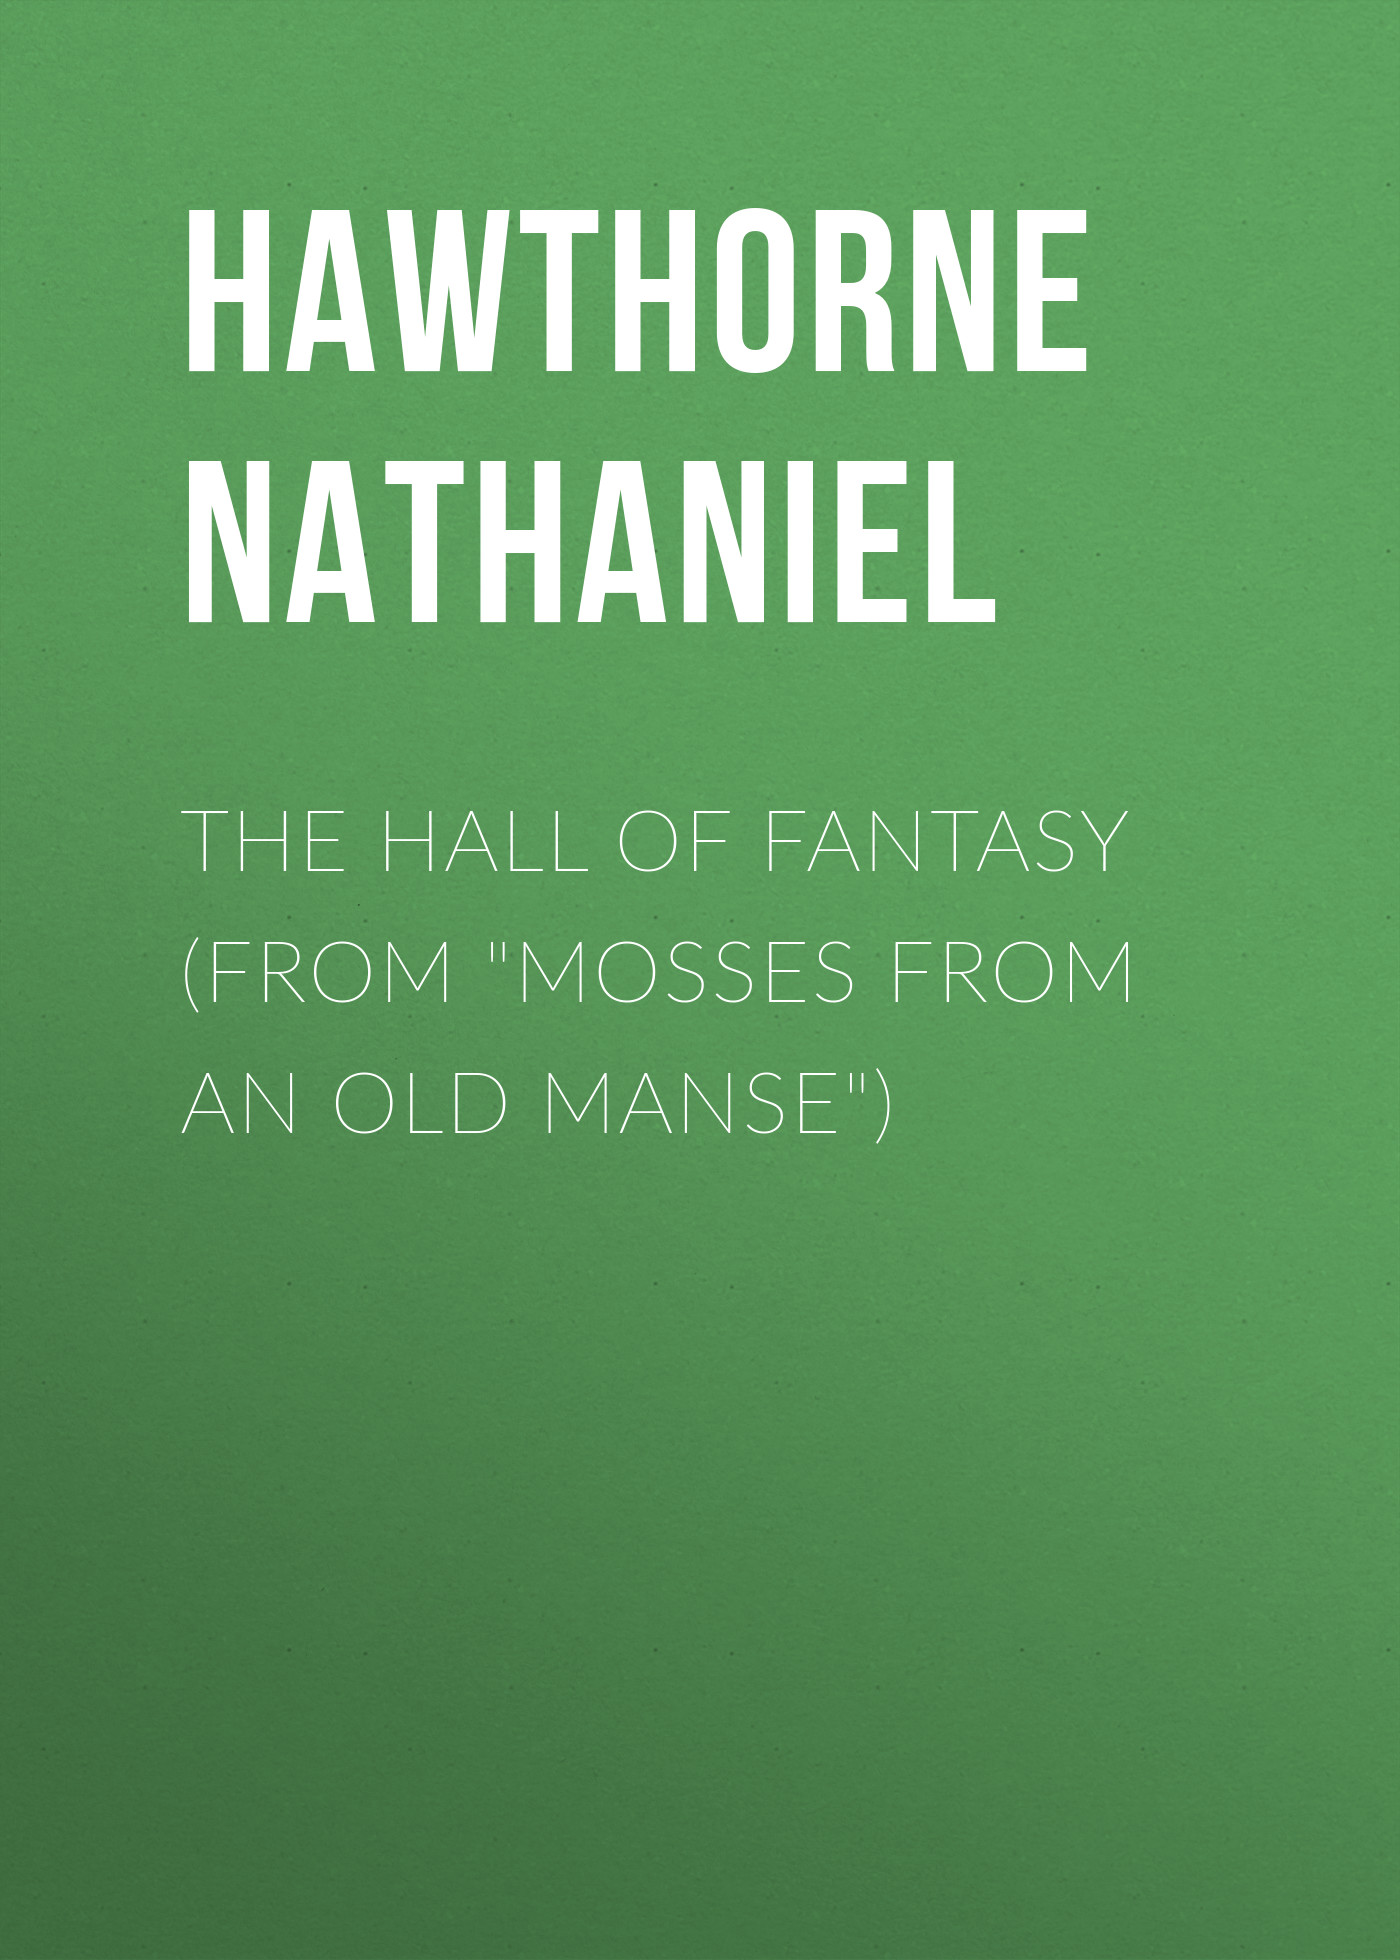 The Hall of Fantasy (From"Mosses from an Old Manse")